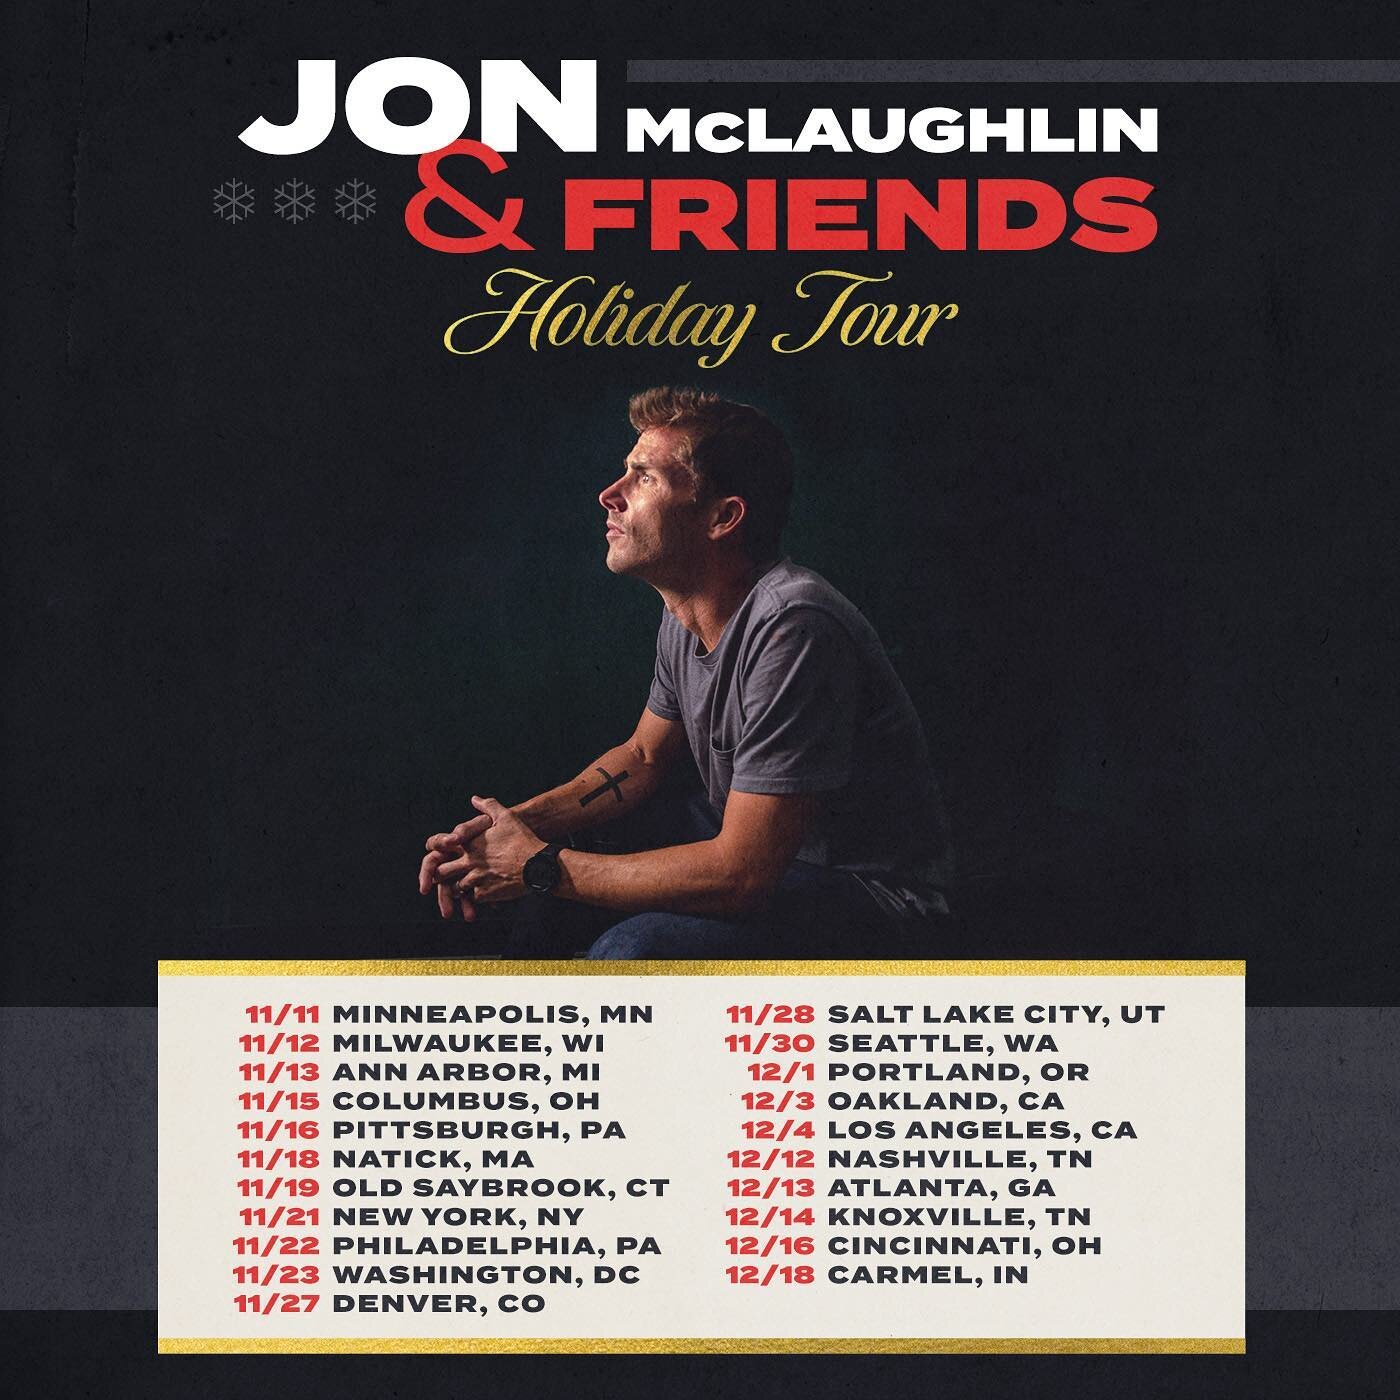 Hey everyone! So excited to head back out on the road this Holiday Season for the Jon McLaughlin &amp; Friends Holiday Tour! 

We&rsquo;re playing 21 (!) dates across the US and I&rsquo;ve invited a ton of special, surprise guests to join me. Make su